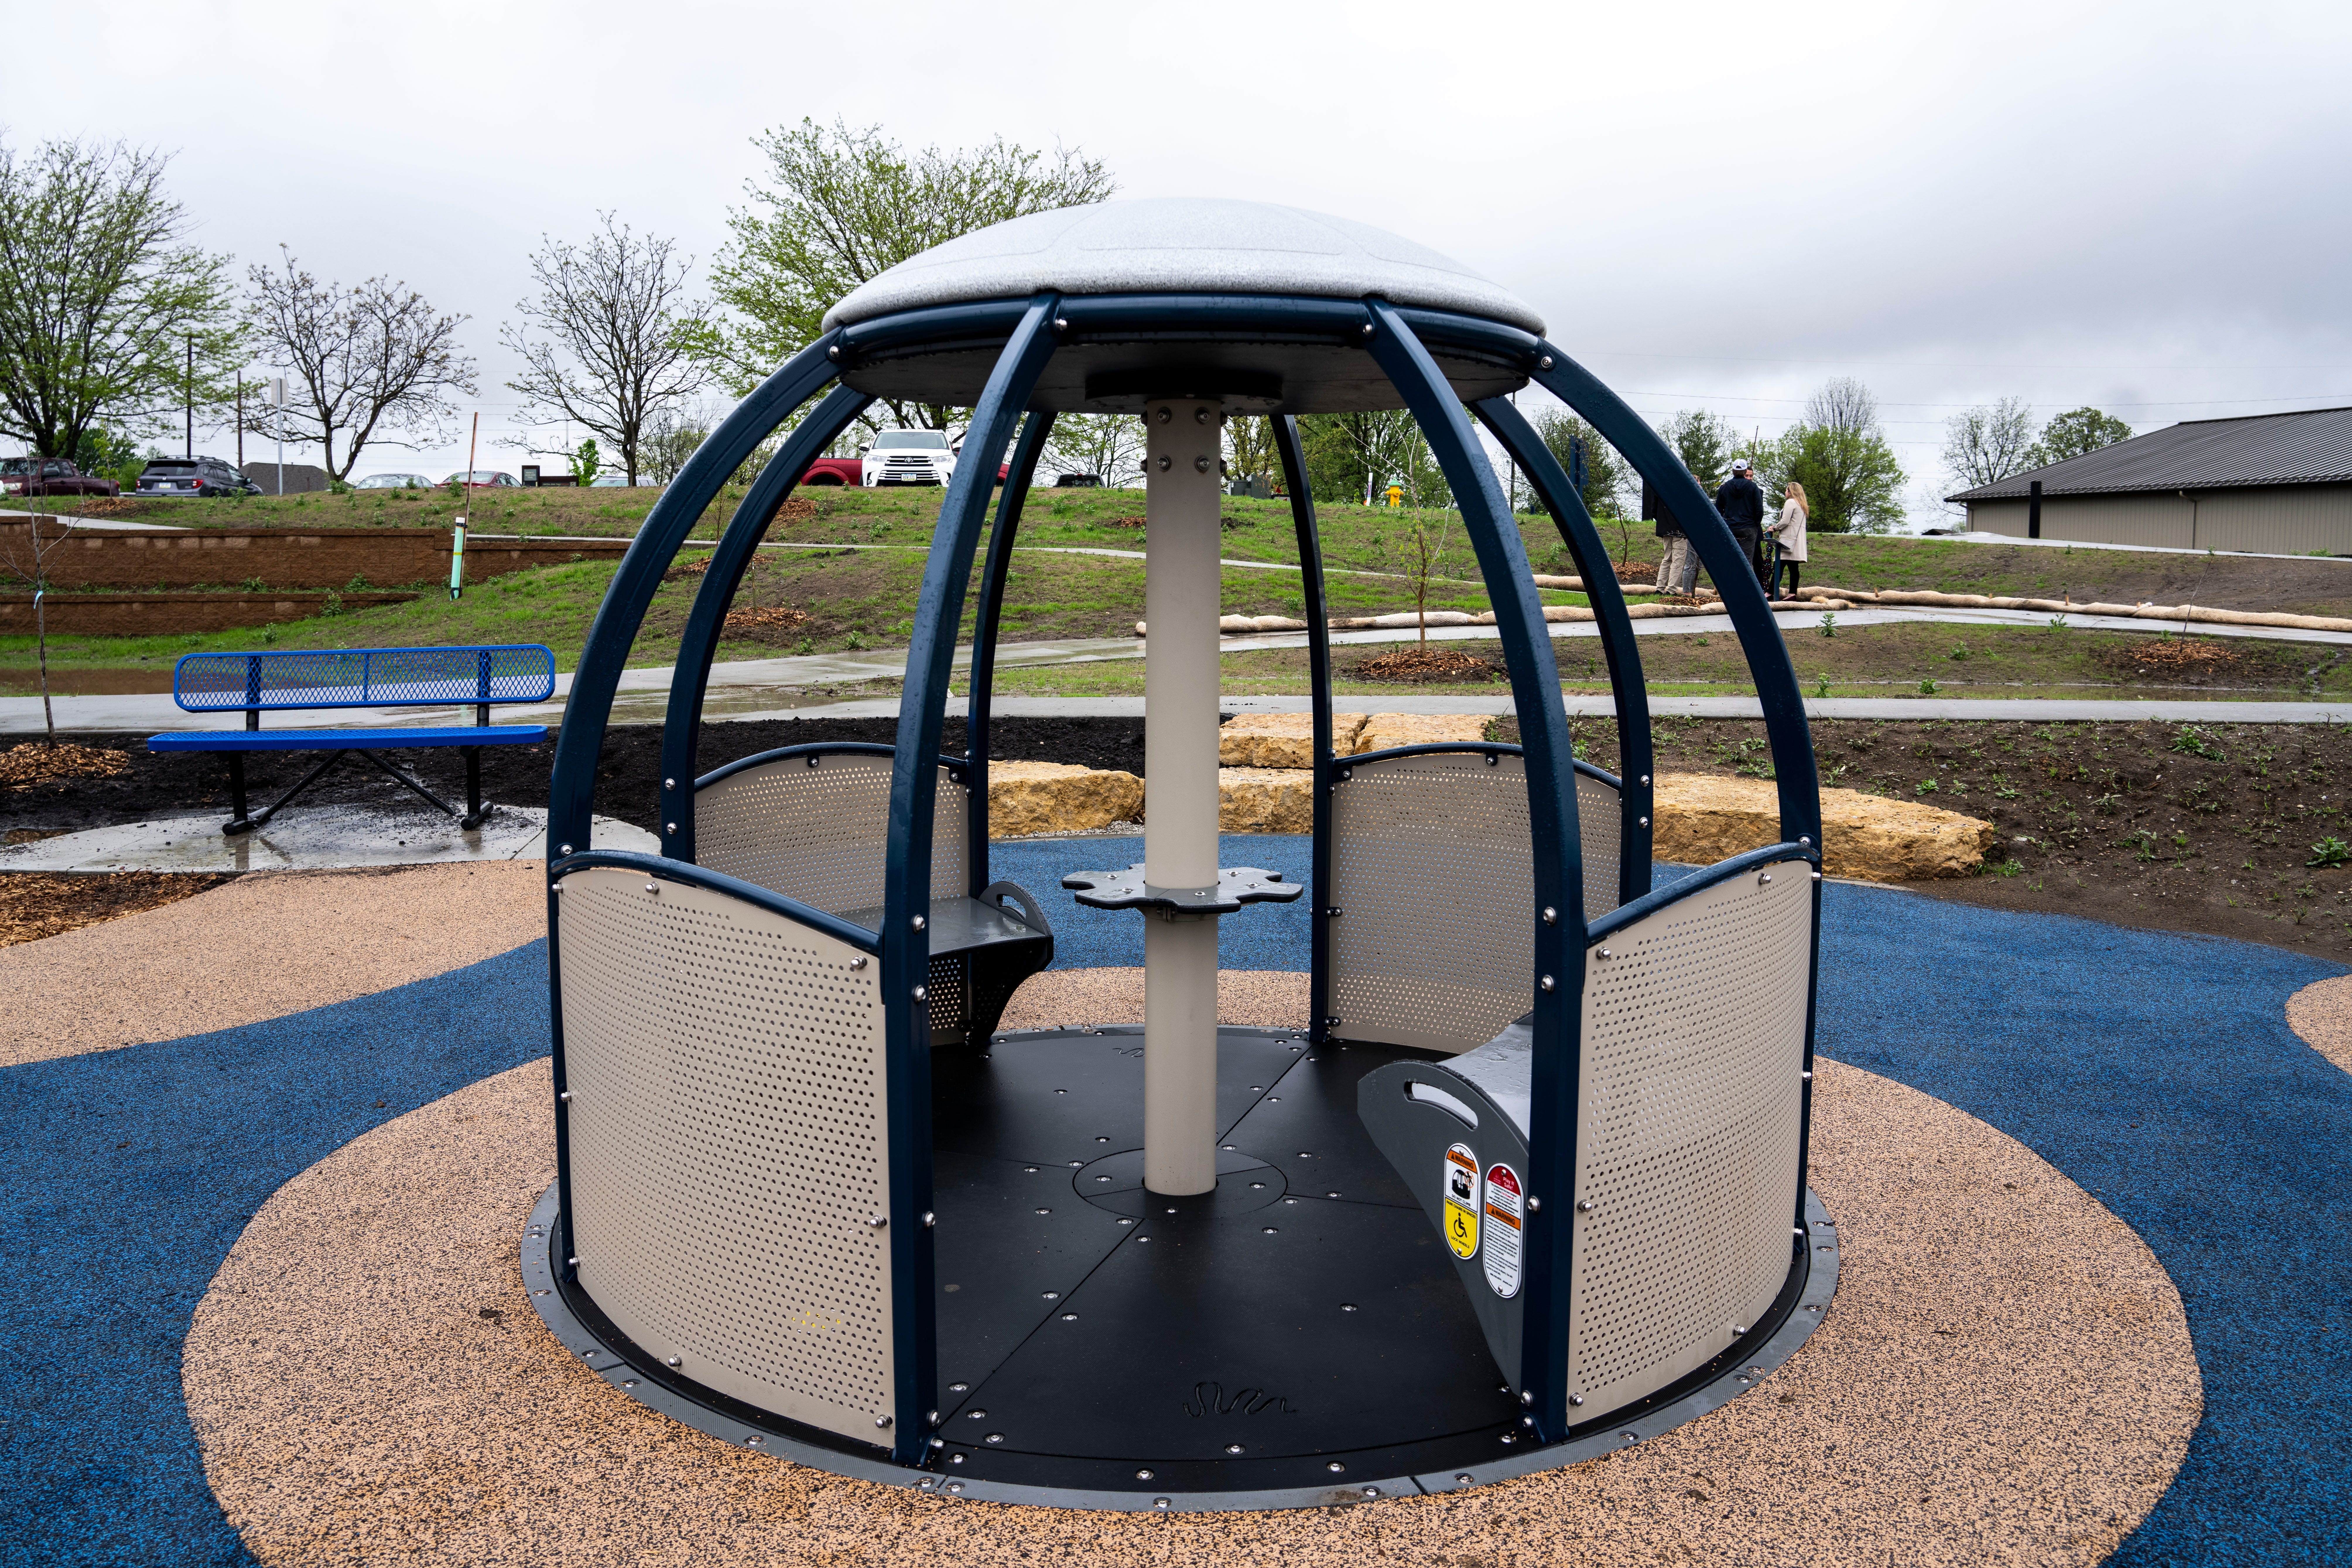 Des Moines' newest accessible park is now open. Here's what it offers.